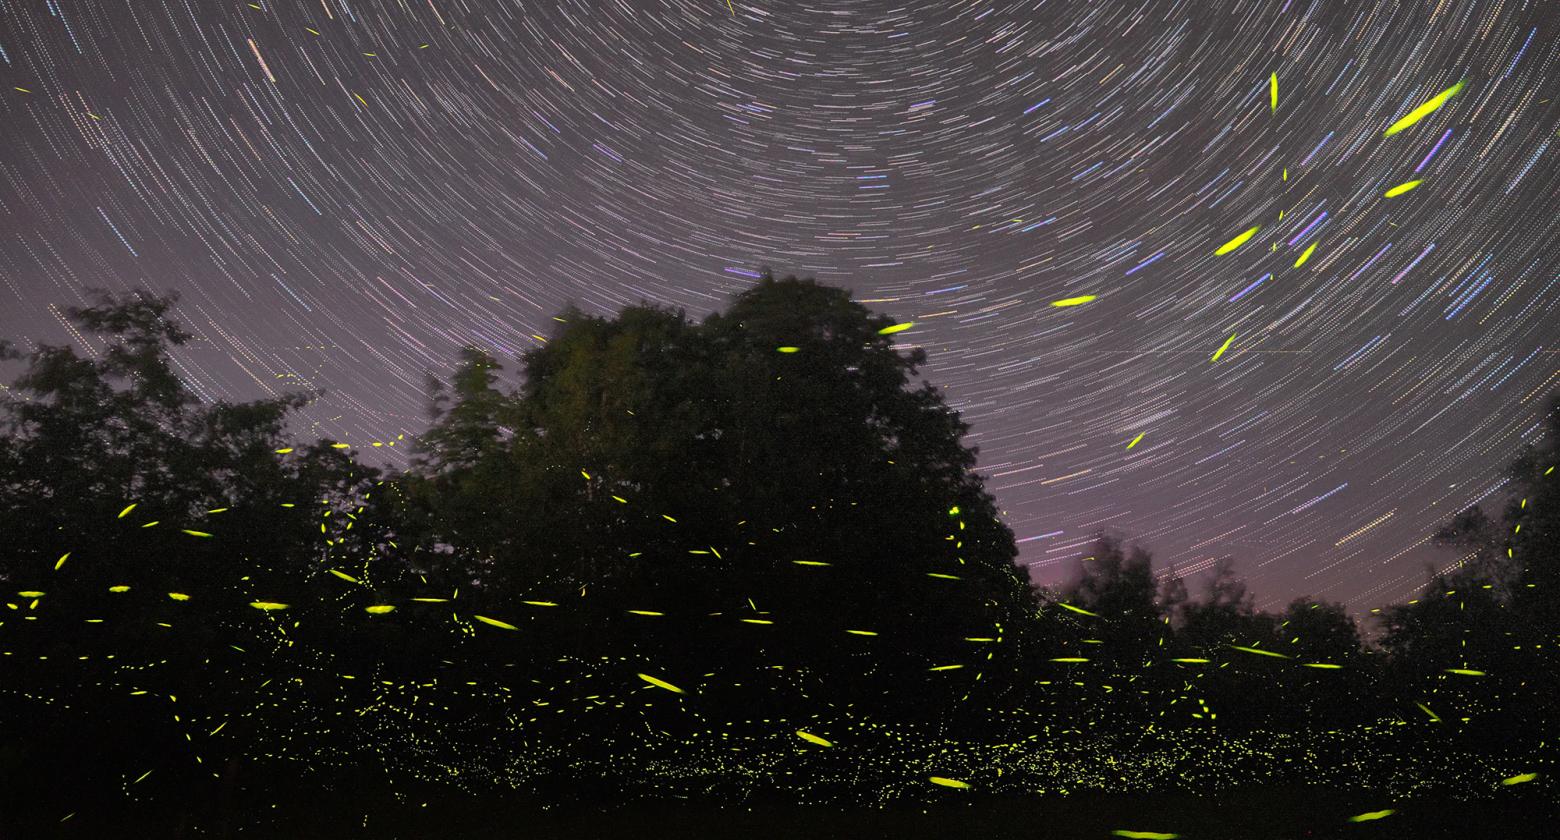 [image] Fireflies in New Mexico? Yes, if You Know Where to Look